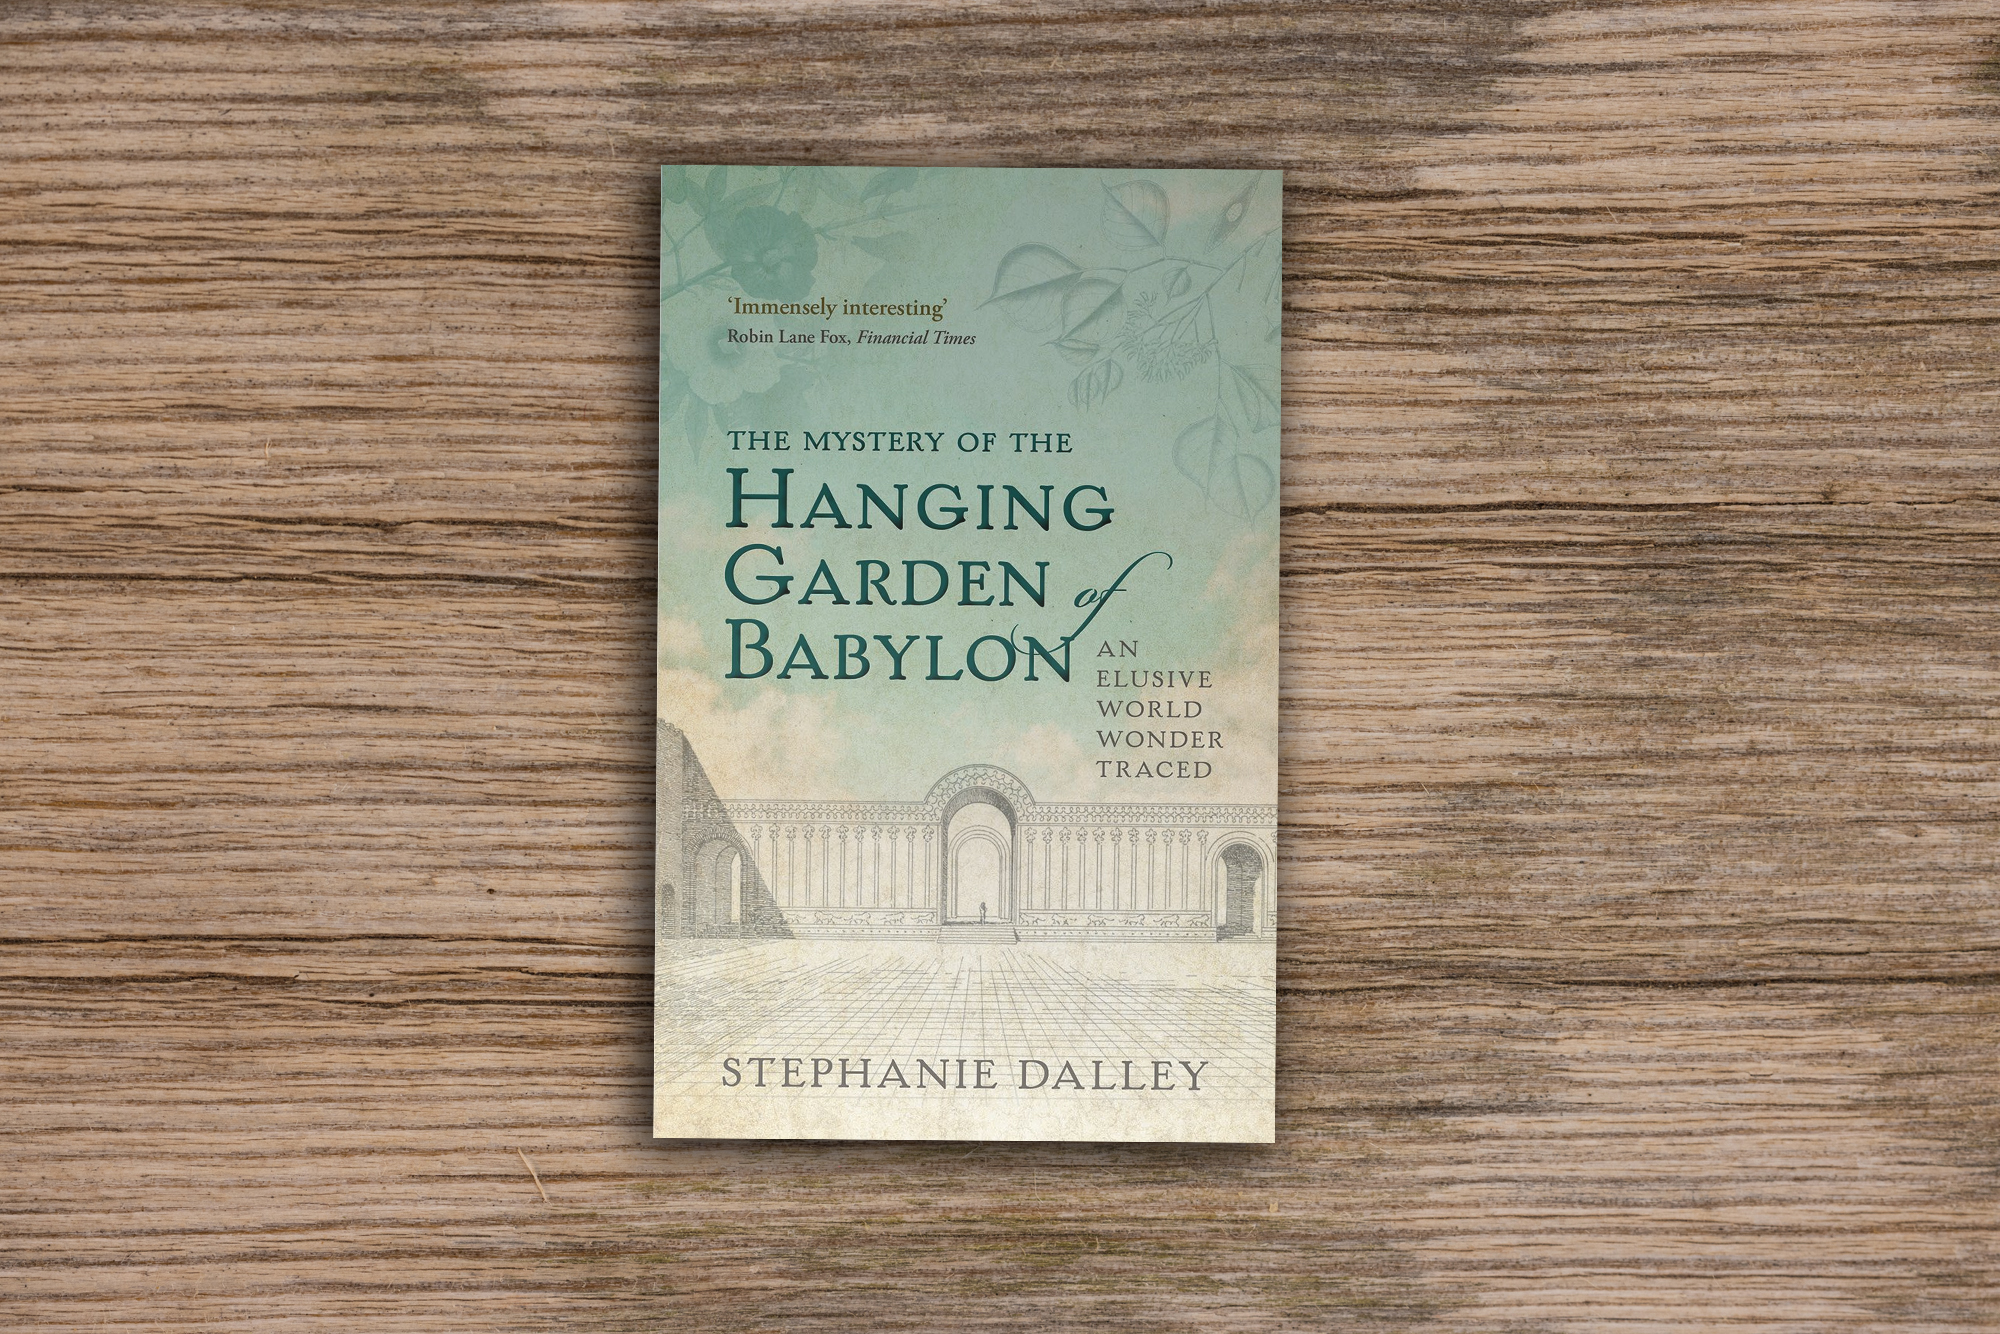 Cover of the book "The mystery of the Hanging Gardens of Babylon" by Stephanie Dalley. Background photo by engin akyurt on Unsplash.